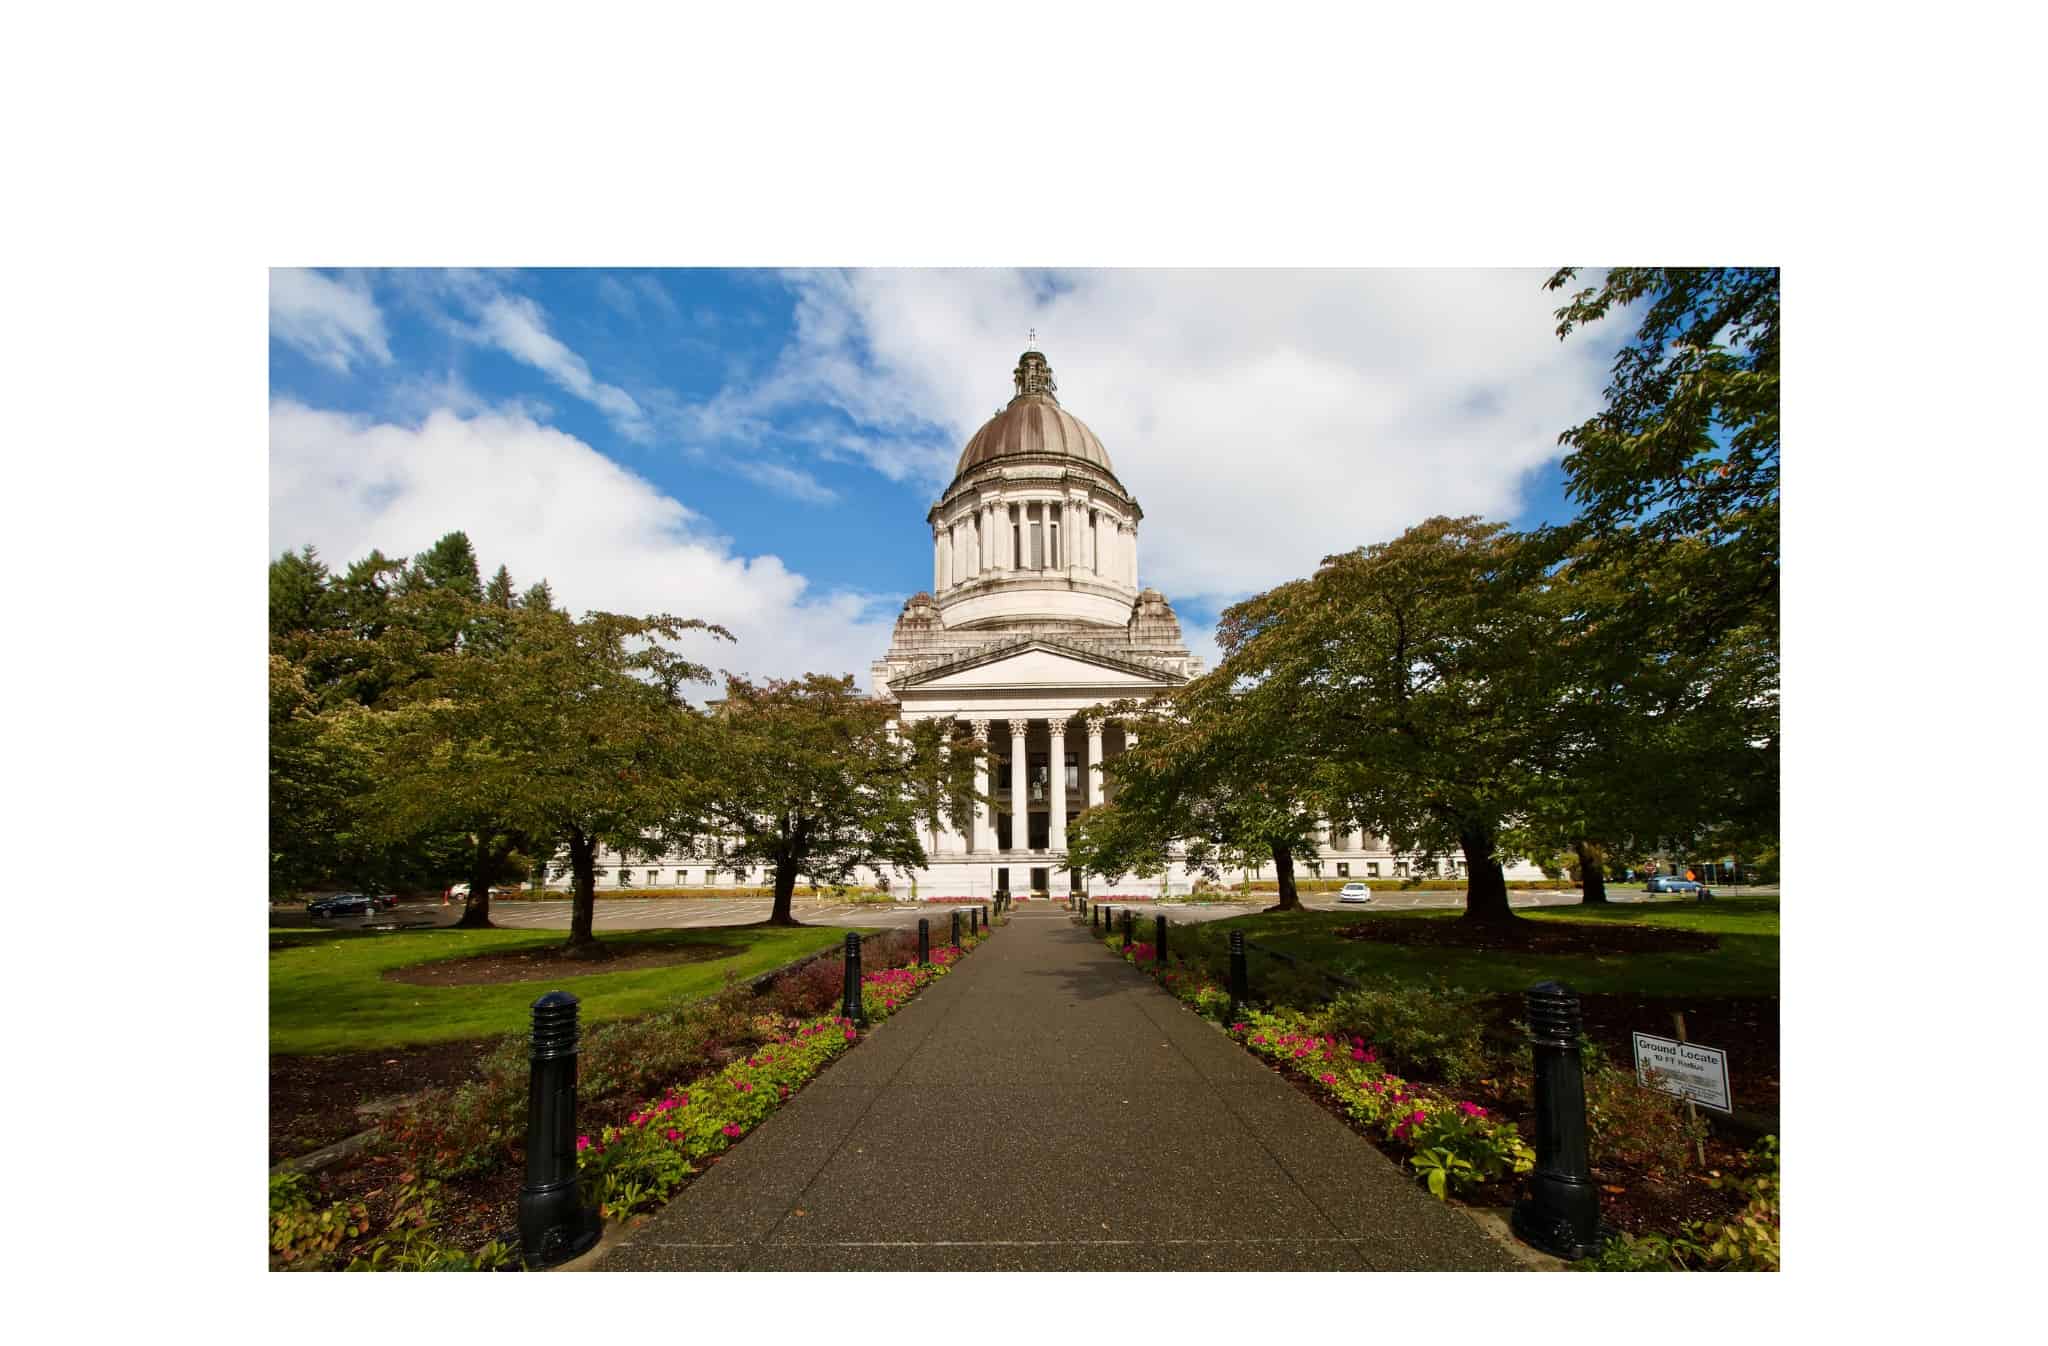 The State Capitol buiding in Olympia is pictured against a blue sky with clouds - there are trees and a walkway with flowers in the foreground.